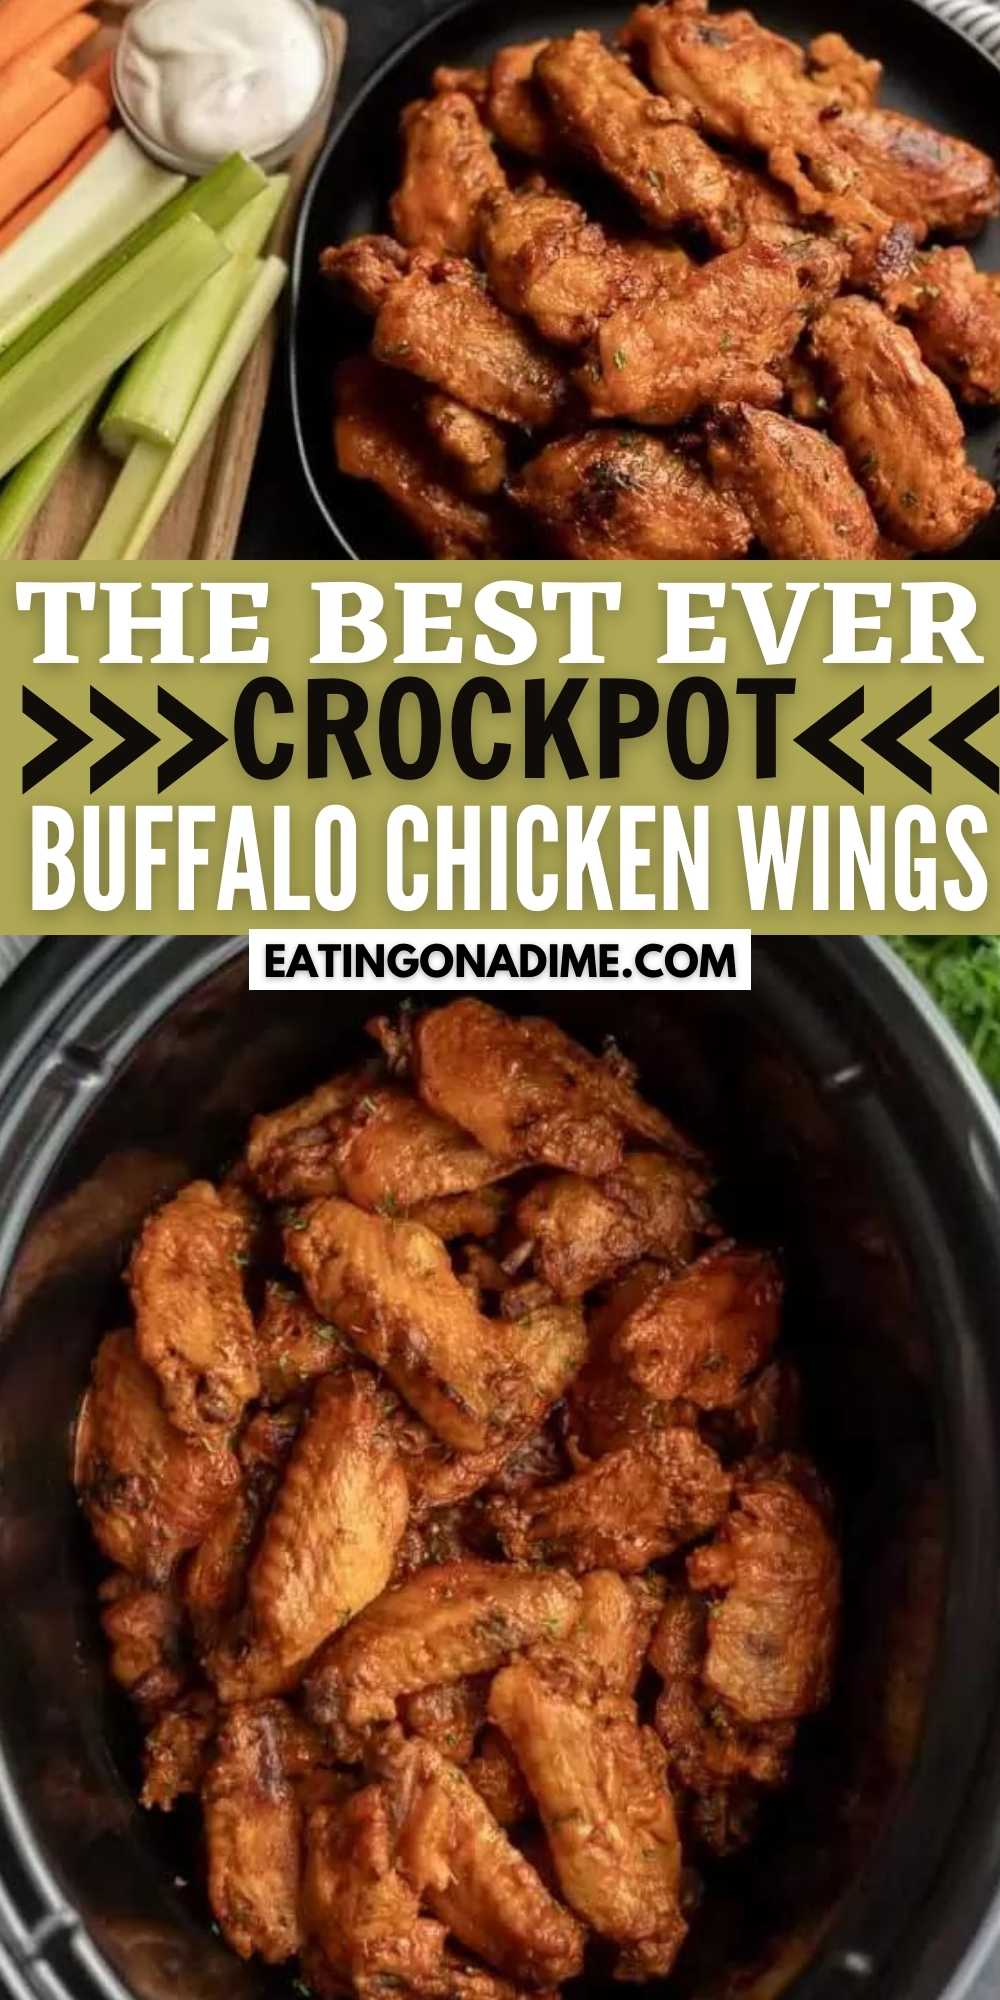 Crock Pot Buffalo Chicken Wings takes all of the work out of traditional chicken wings. Enjoy tender and crispy buffalo chicken wings that are easy to make in a slow cooker.  #eatingonadime #chickenwings #chickenrecipes #crockpotrecipes #slowcookerrecipes #wingrecipes 
